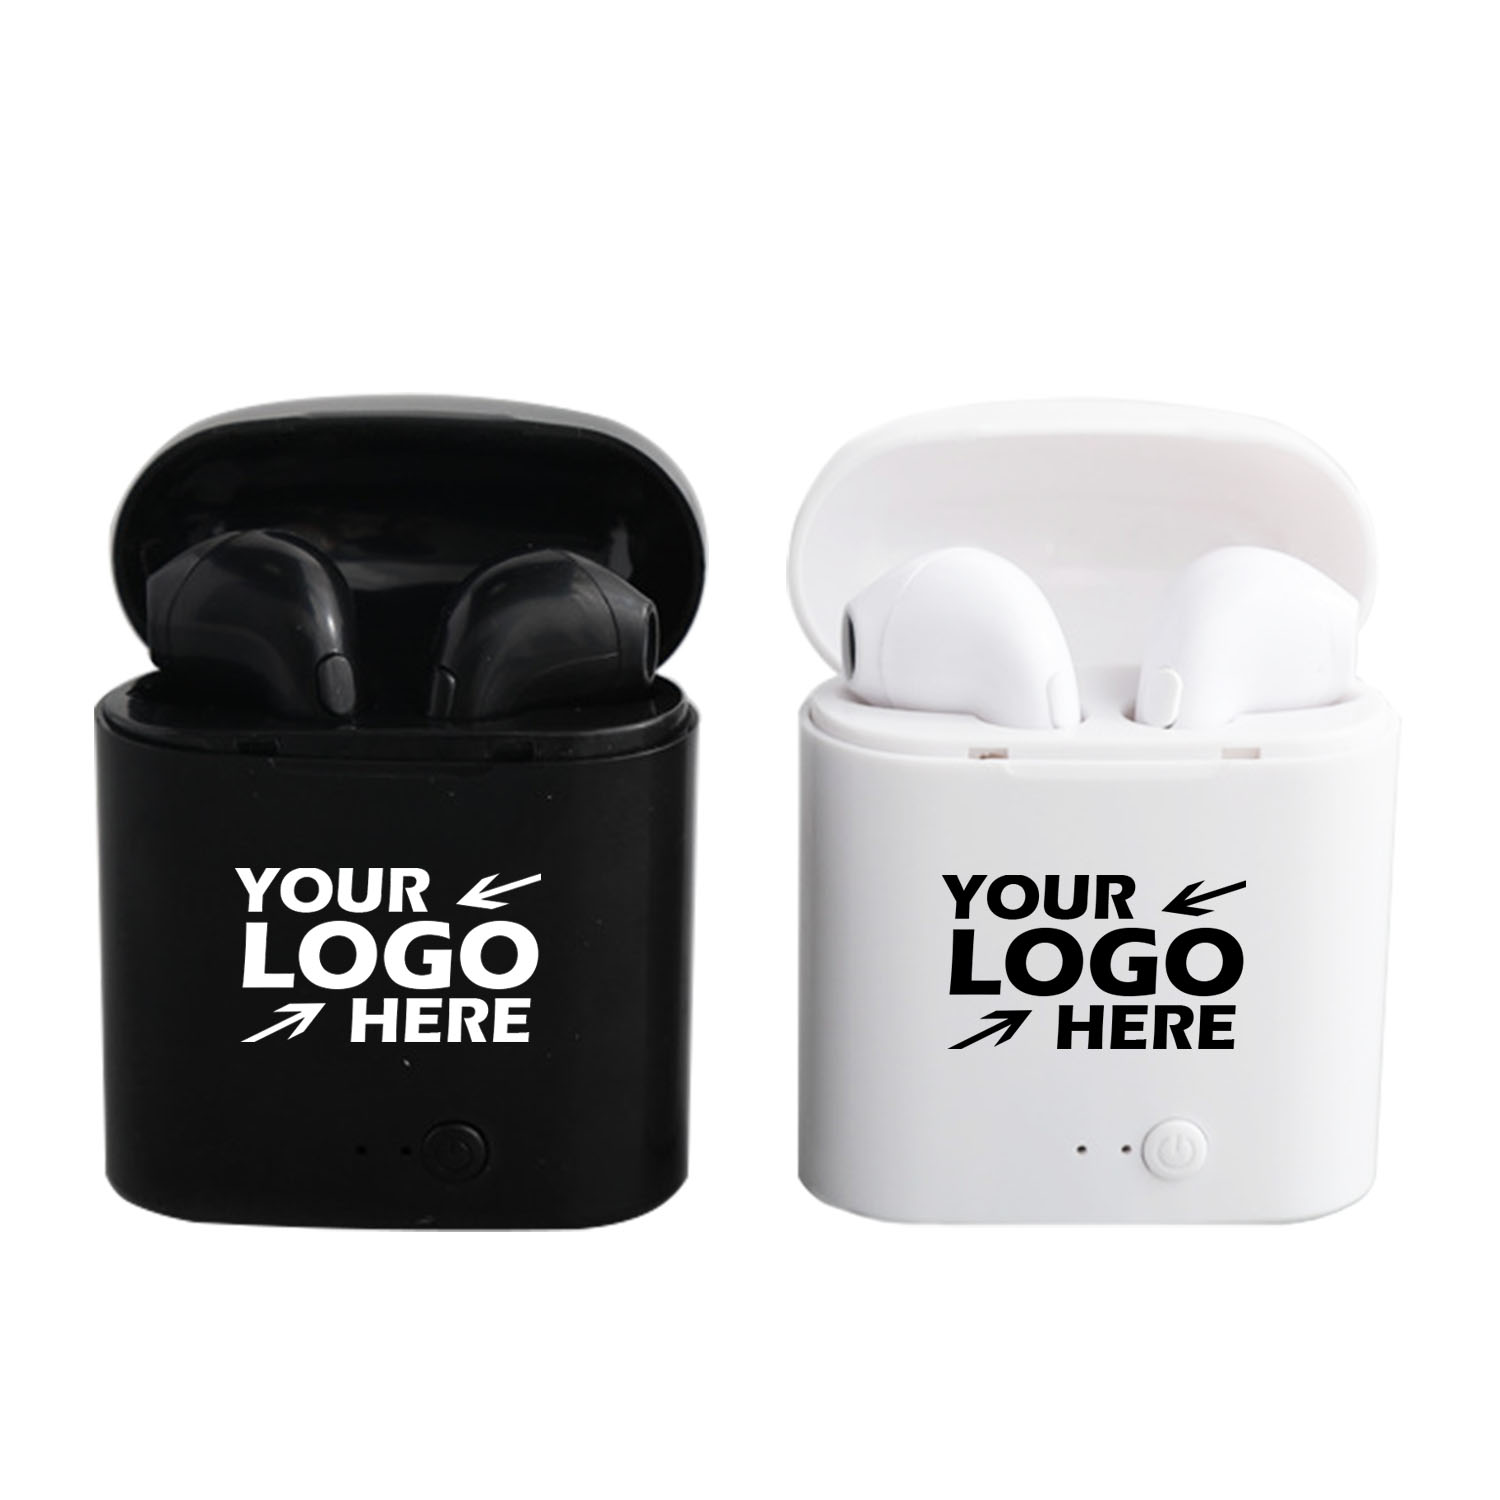 GL-SVH1001 Wireless Earbuds With Charging Bank